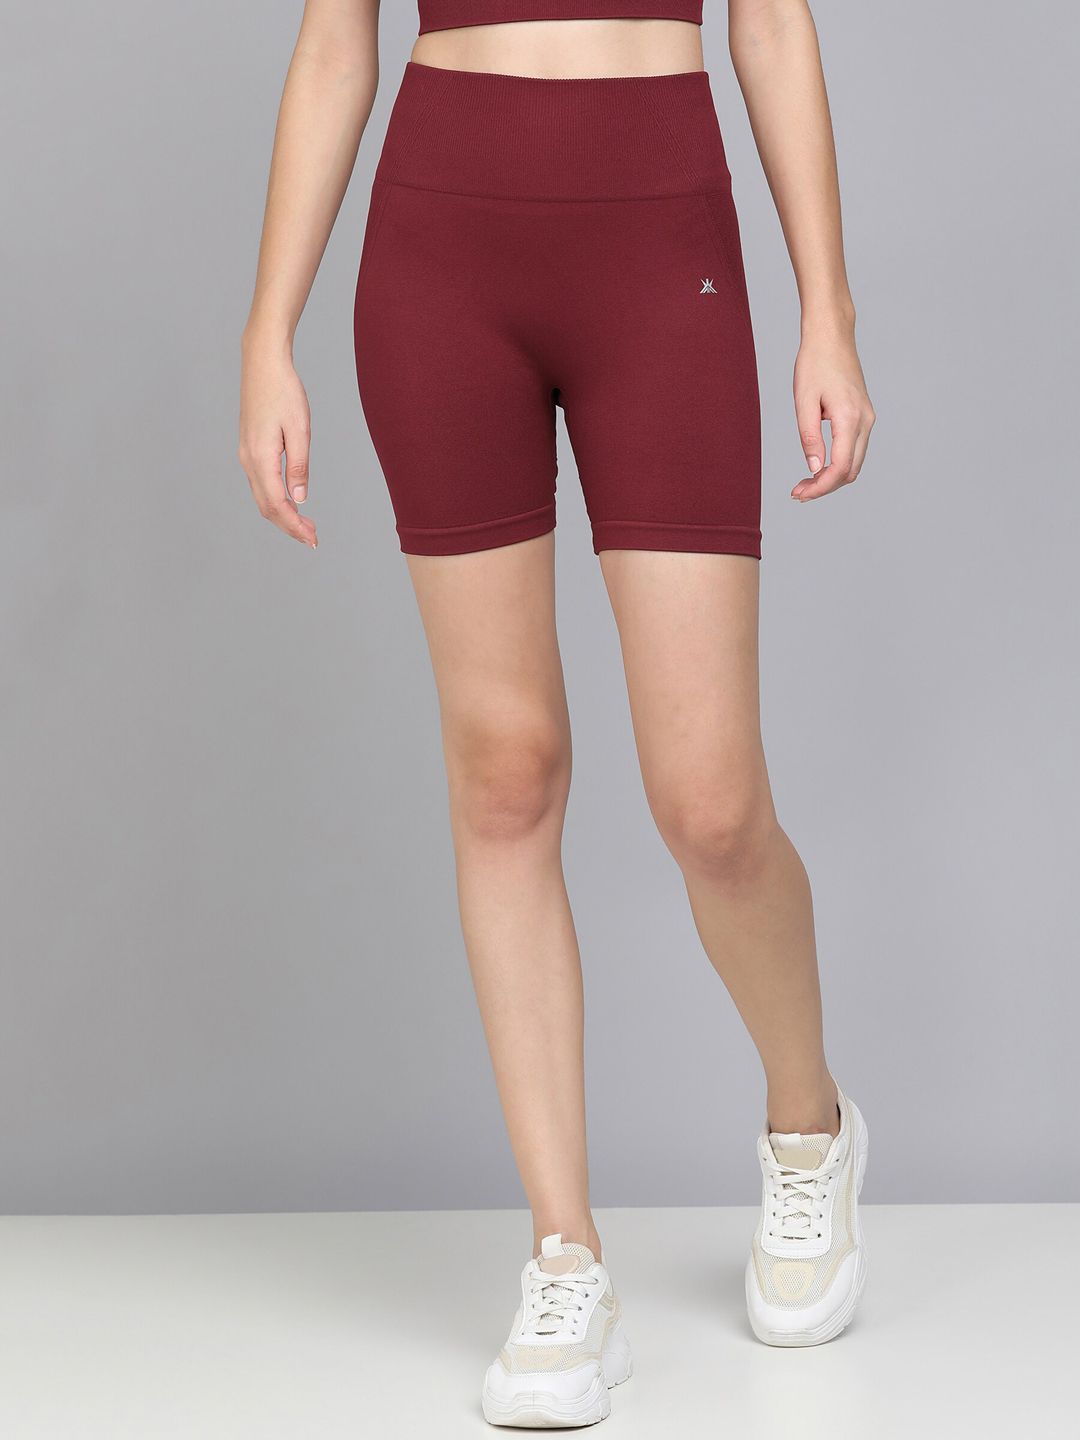 KOBO Women Skinny Fit High-Rise Rapid-Dry Sports Shorts Price in India